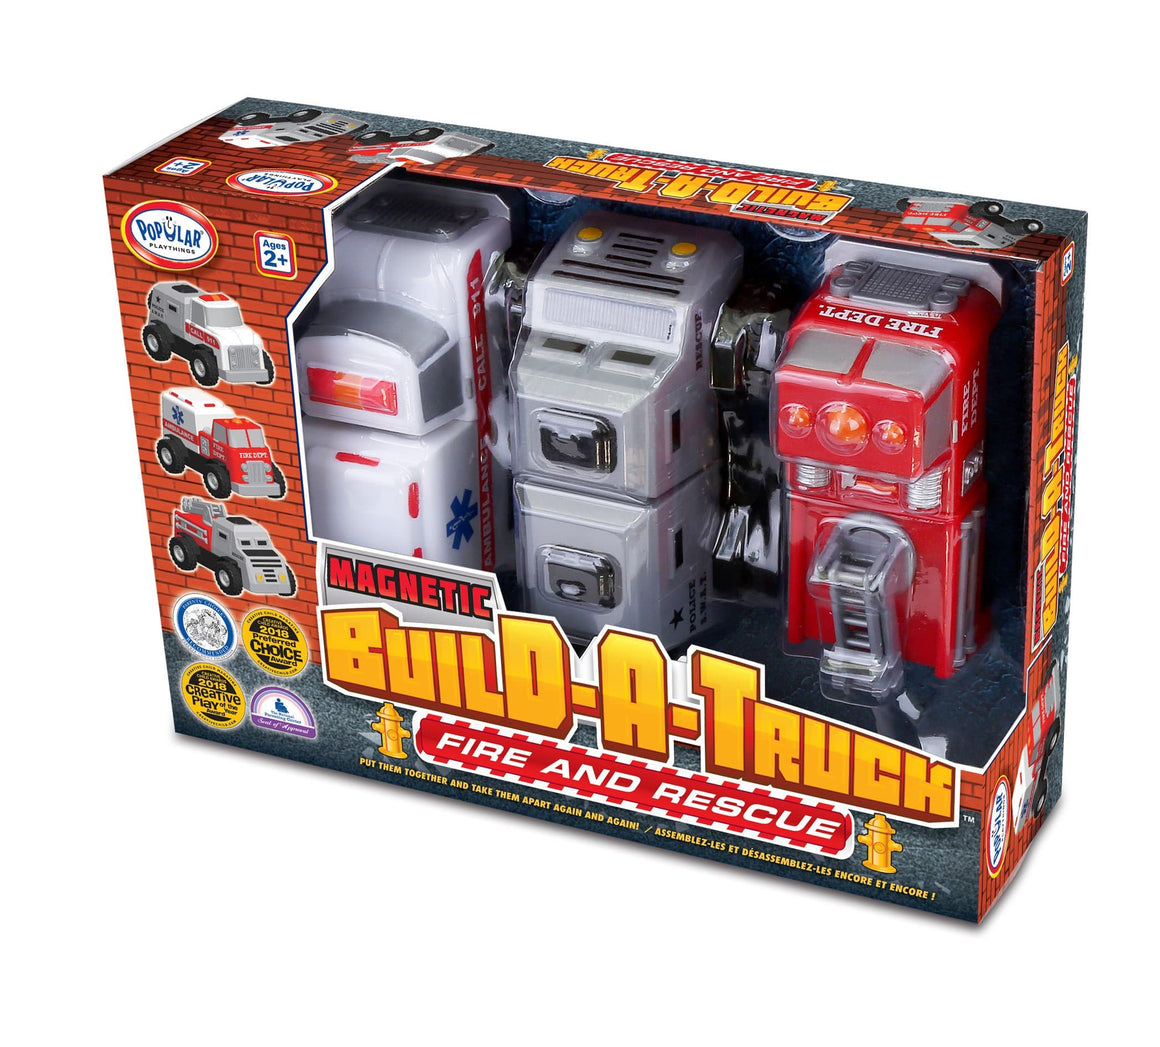 Popular Playthings Magnetic Build-A-Truck Fire and Rescue 美國Popular Playthings磁石配對拼砌玩具-消防車